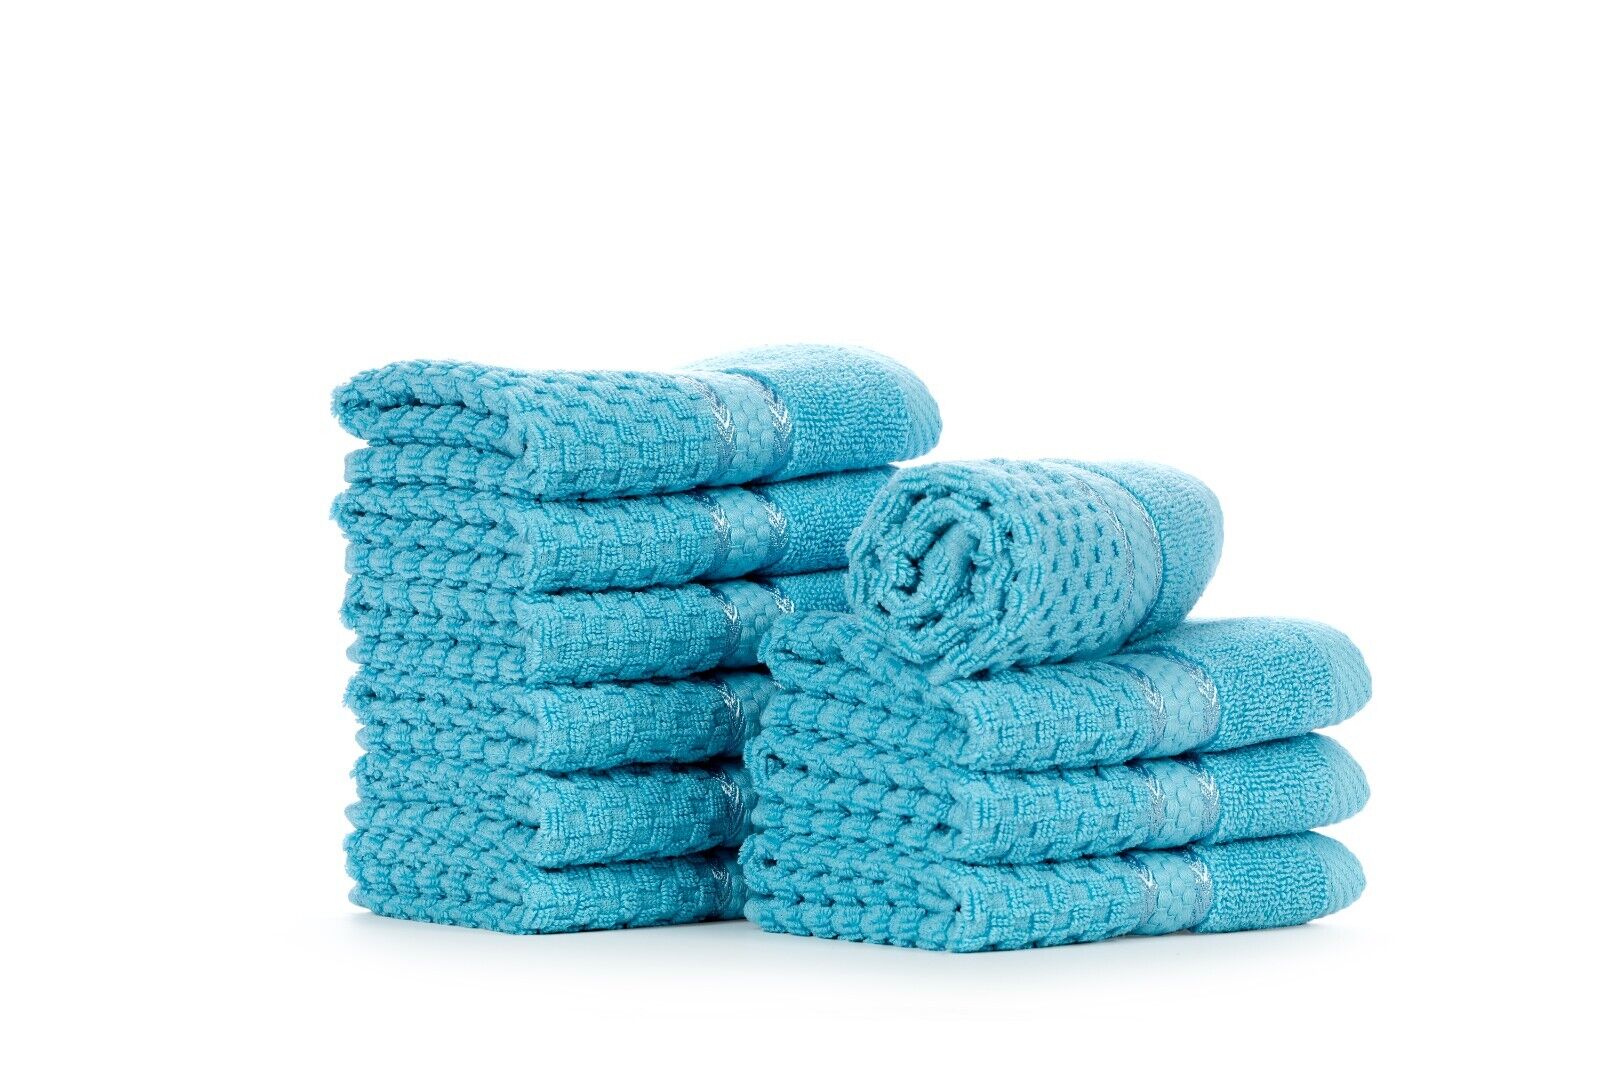 Ample Decor Washcloths Set of 10 - Fingertip Towels for Bathroom, Quick Drying